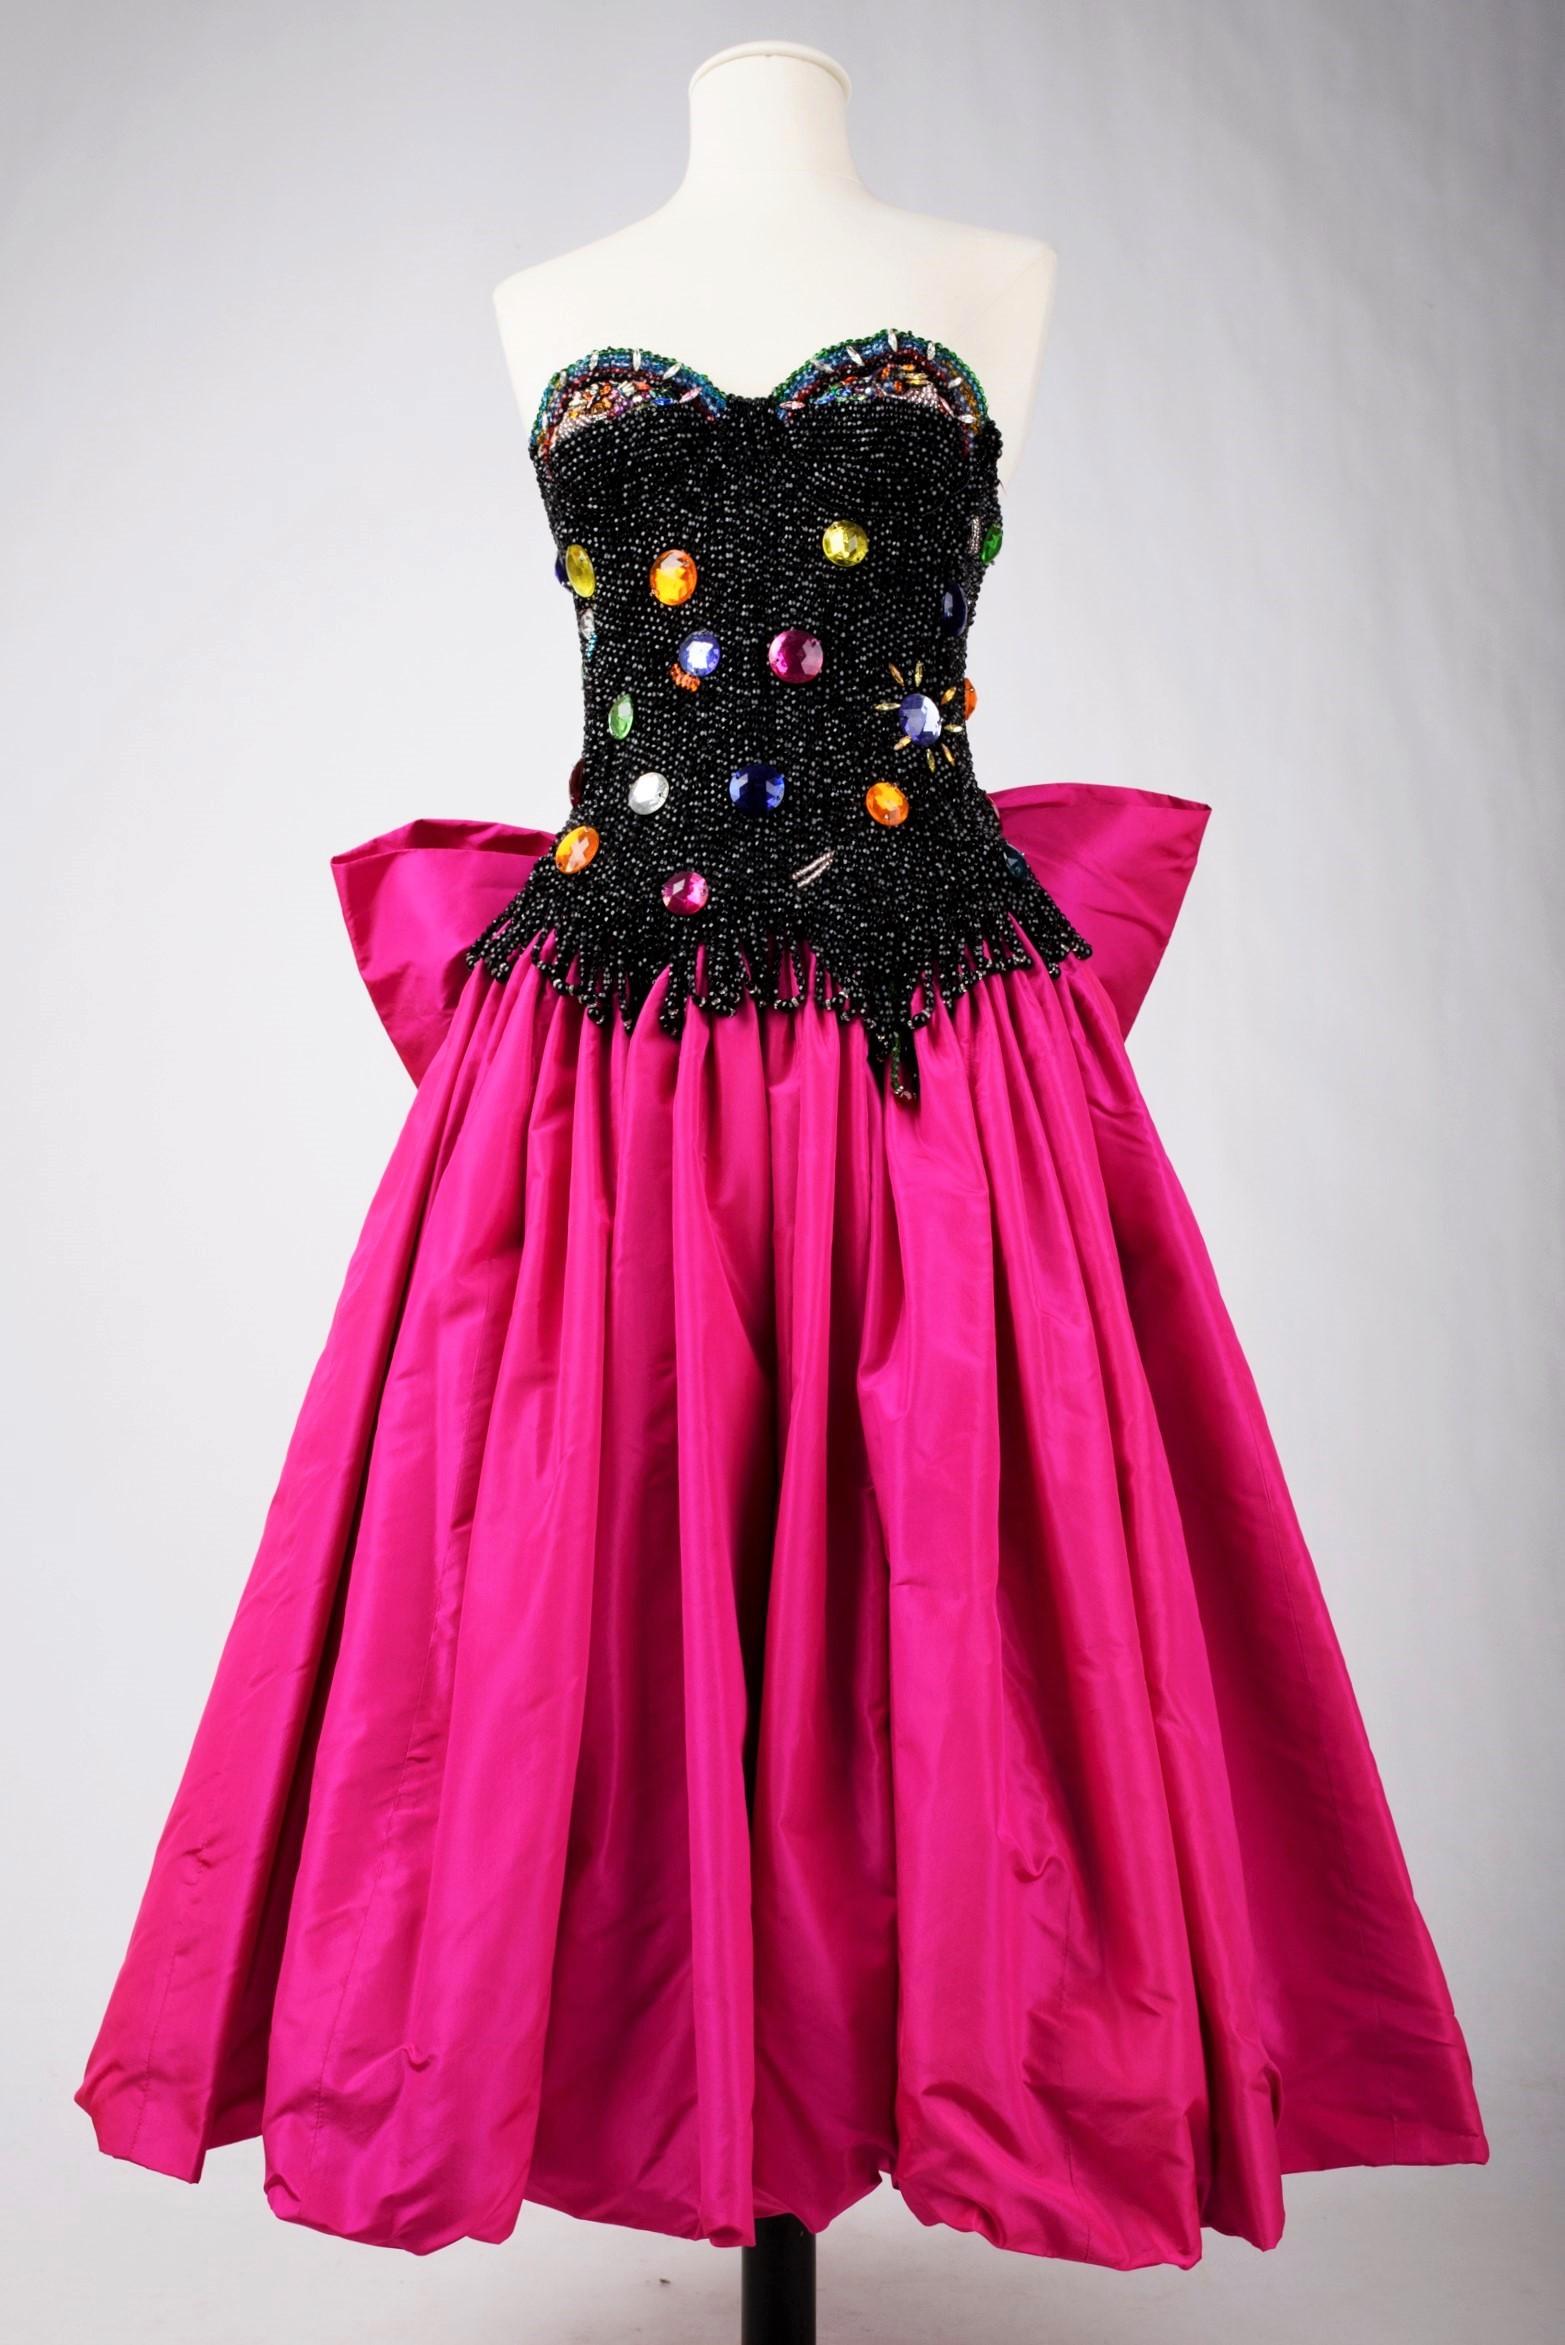 Fall-Winter 1986-1987 Collection

France

An Amazing evening gown, taken from a fairy tale, by Louis Féraud Haute Couture from the 1986-1987 collection. Bustier with plunging neckline bare back, entirely embroidered with jet beads, with large